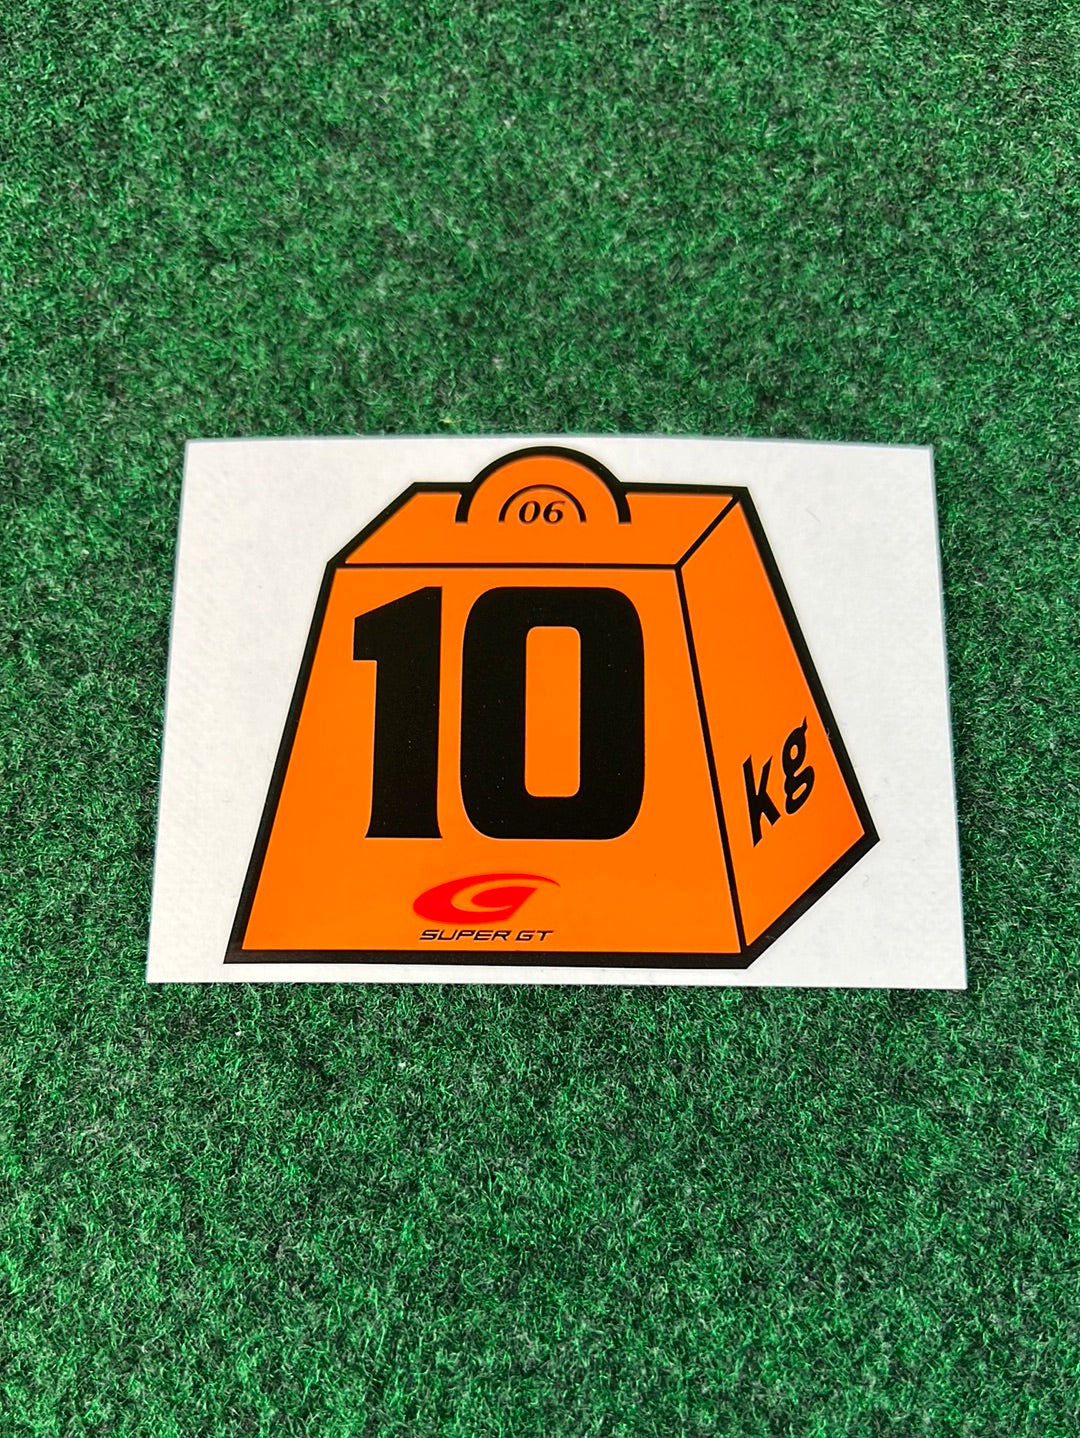 Super GT 2006 - Commemorative 10KG Weight Penalty Collectible Sticker